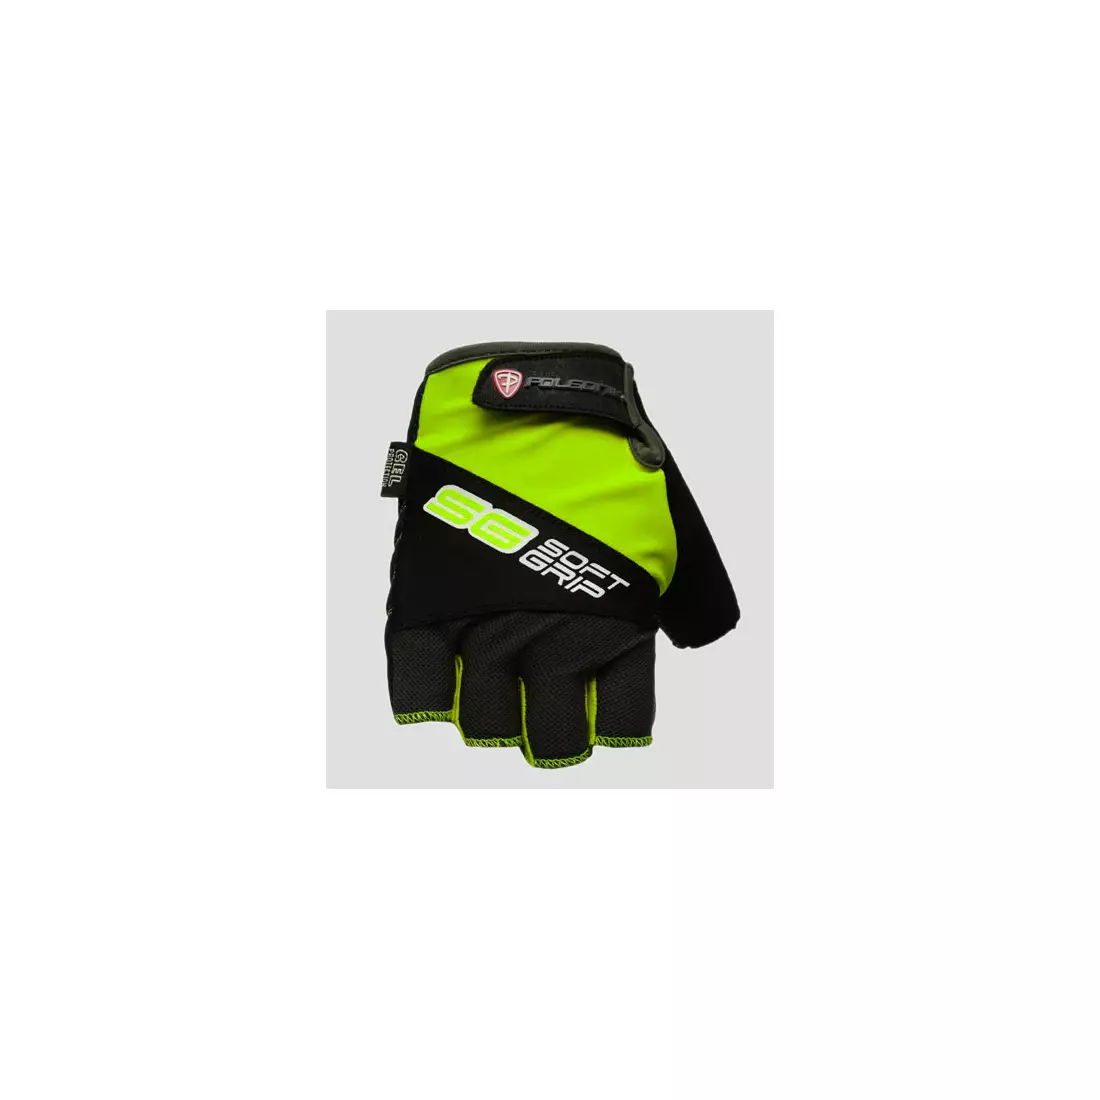 POLEDNIK SOFTGRIP NEW14 cycling gloves, color: Fluor